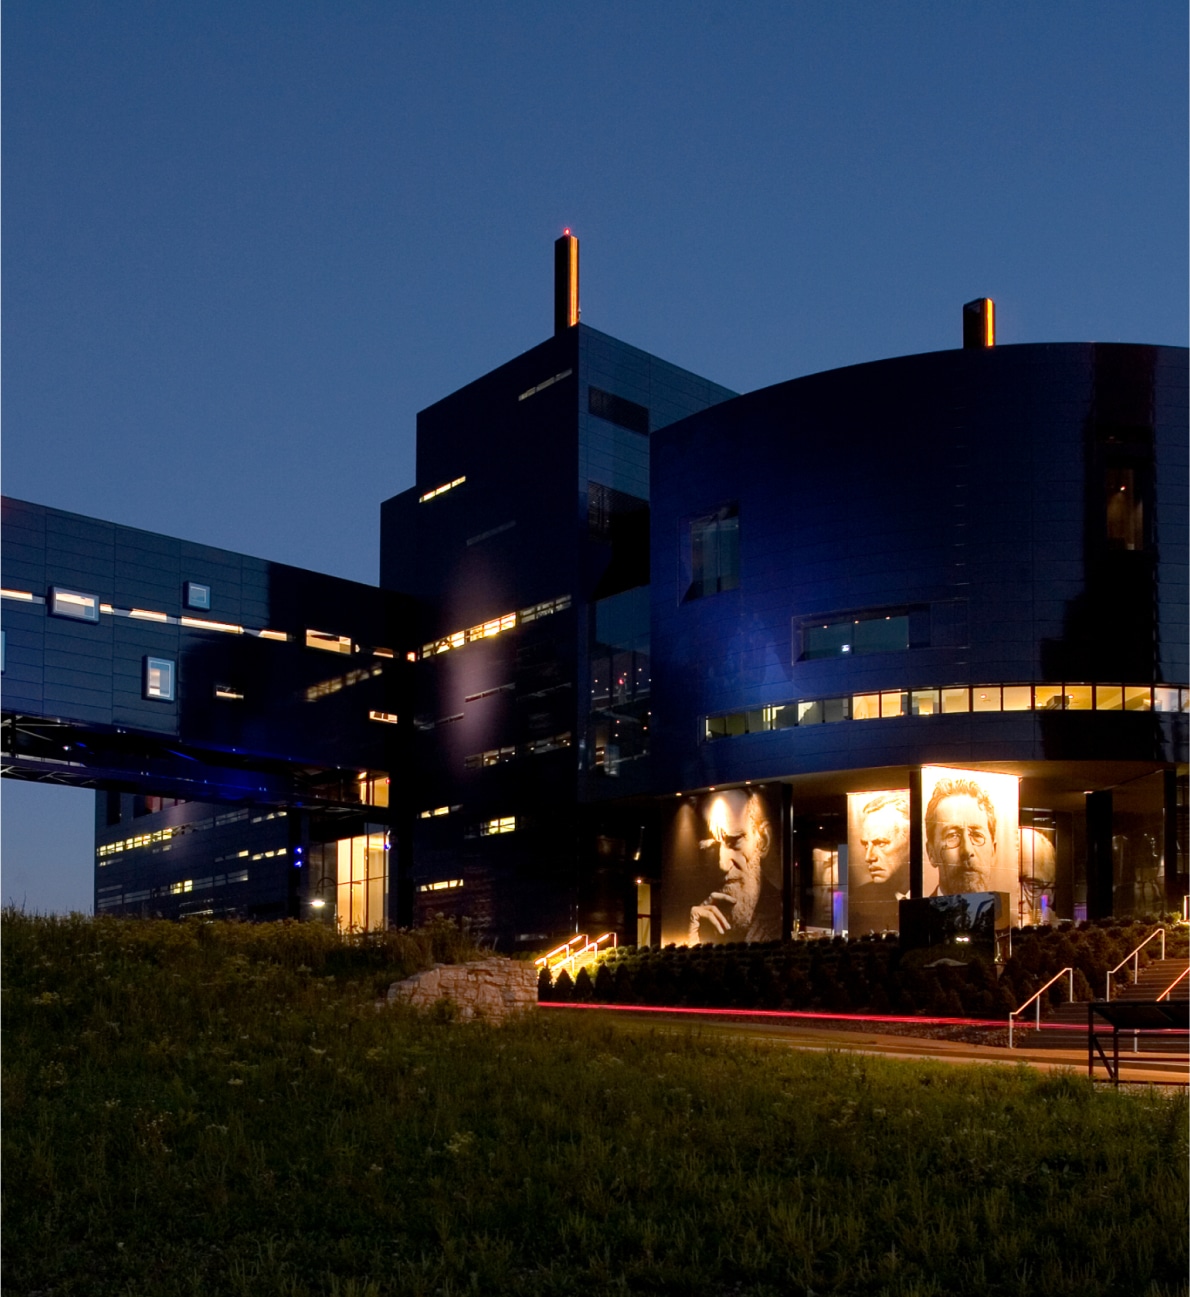 Exterior night view of the Guthrie Theater in Minneapolis, built by McGough